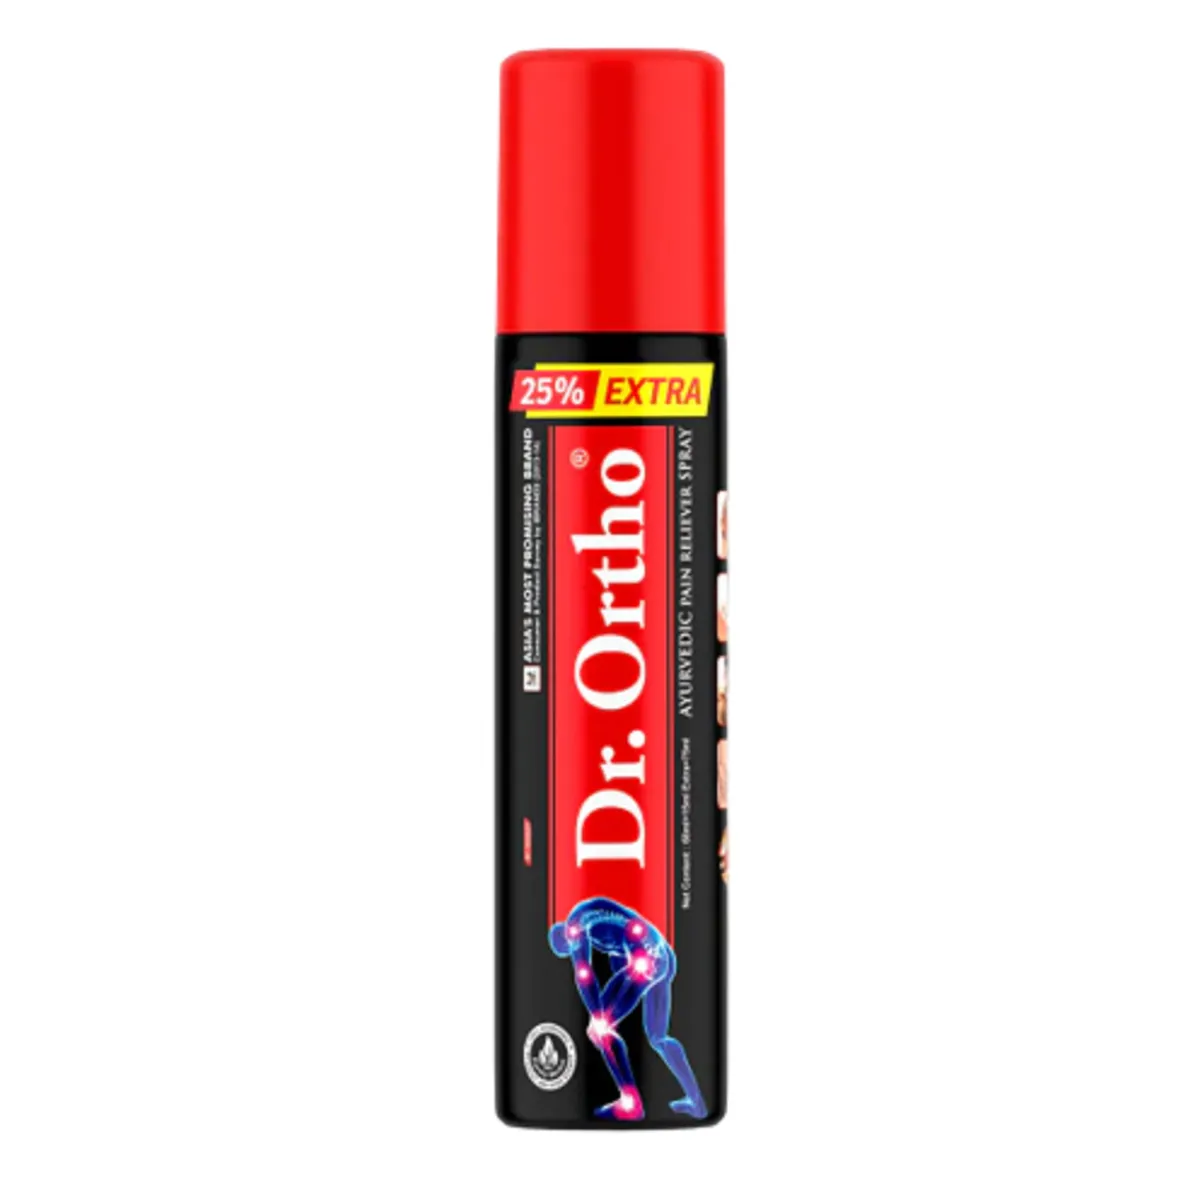 Dr Ortho Pain Relief Spray 75ml